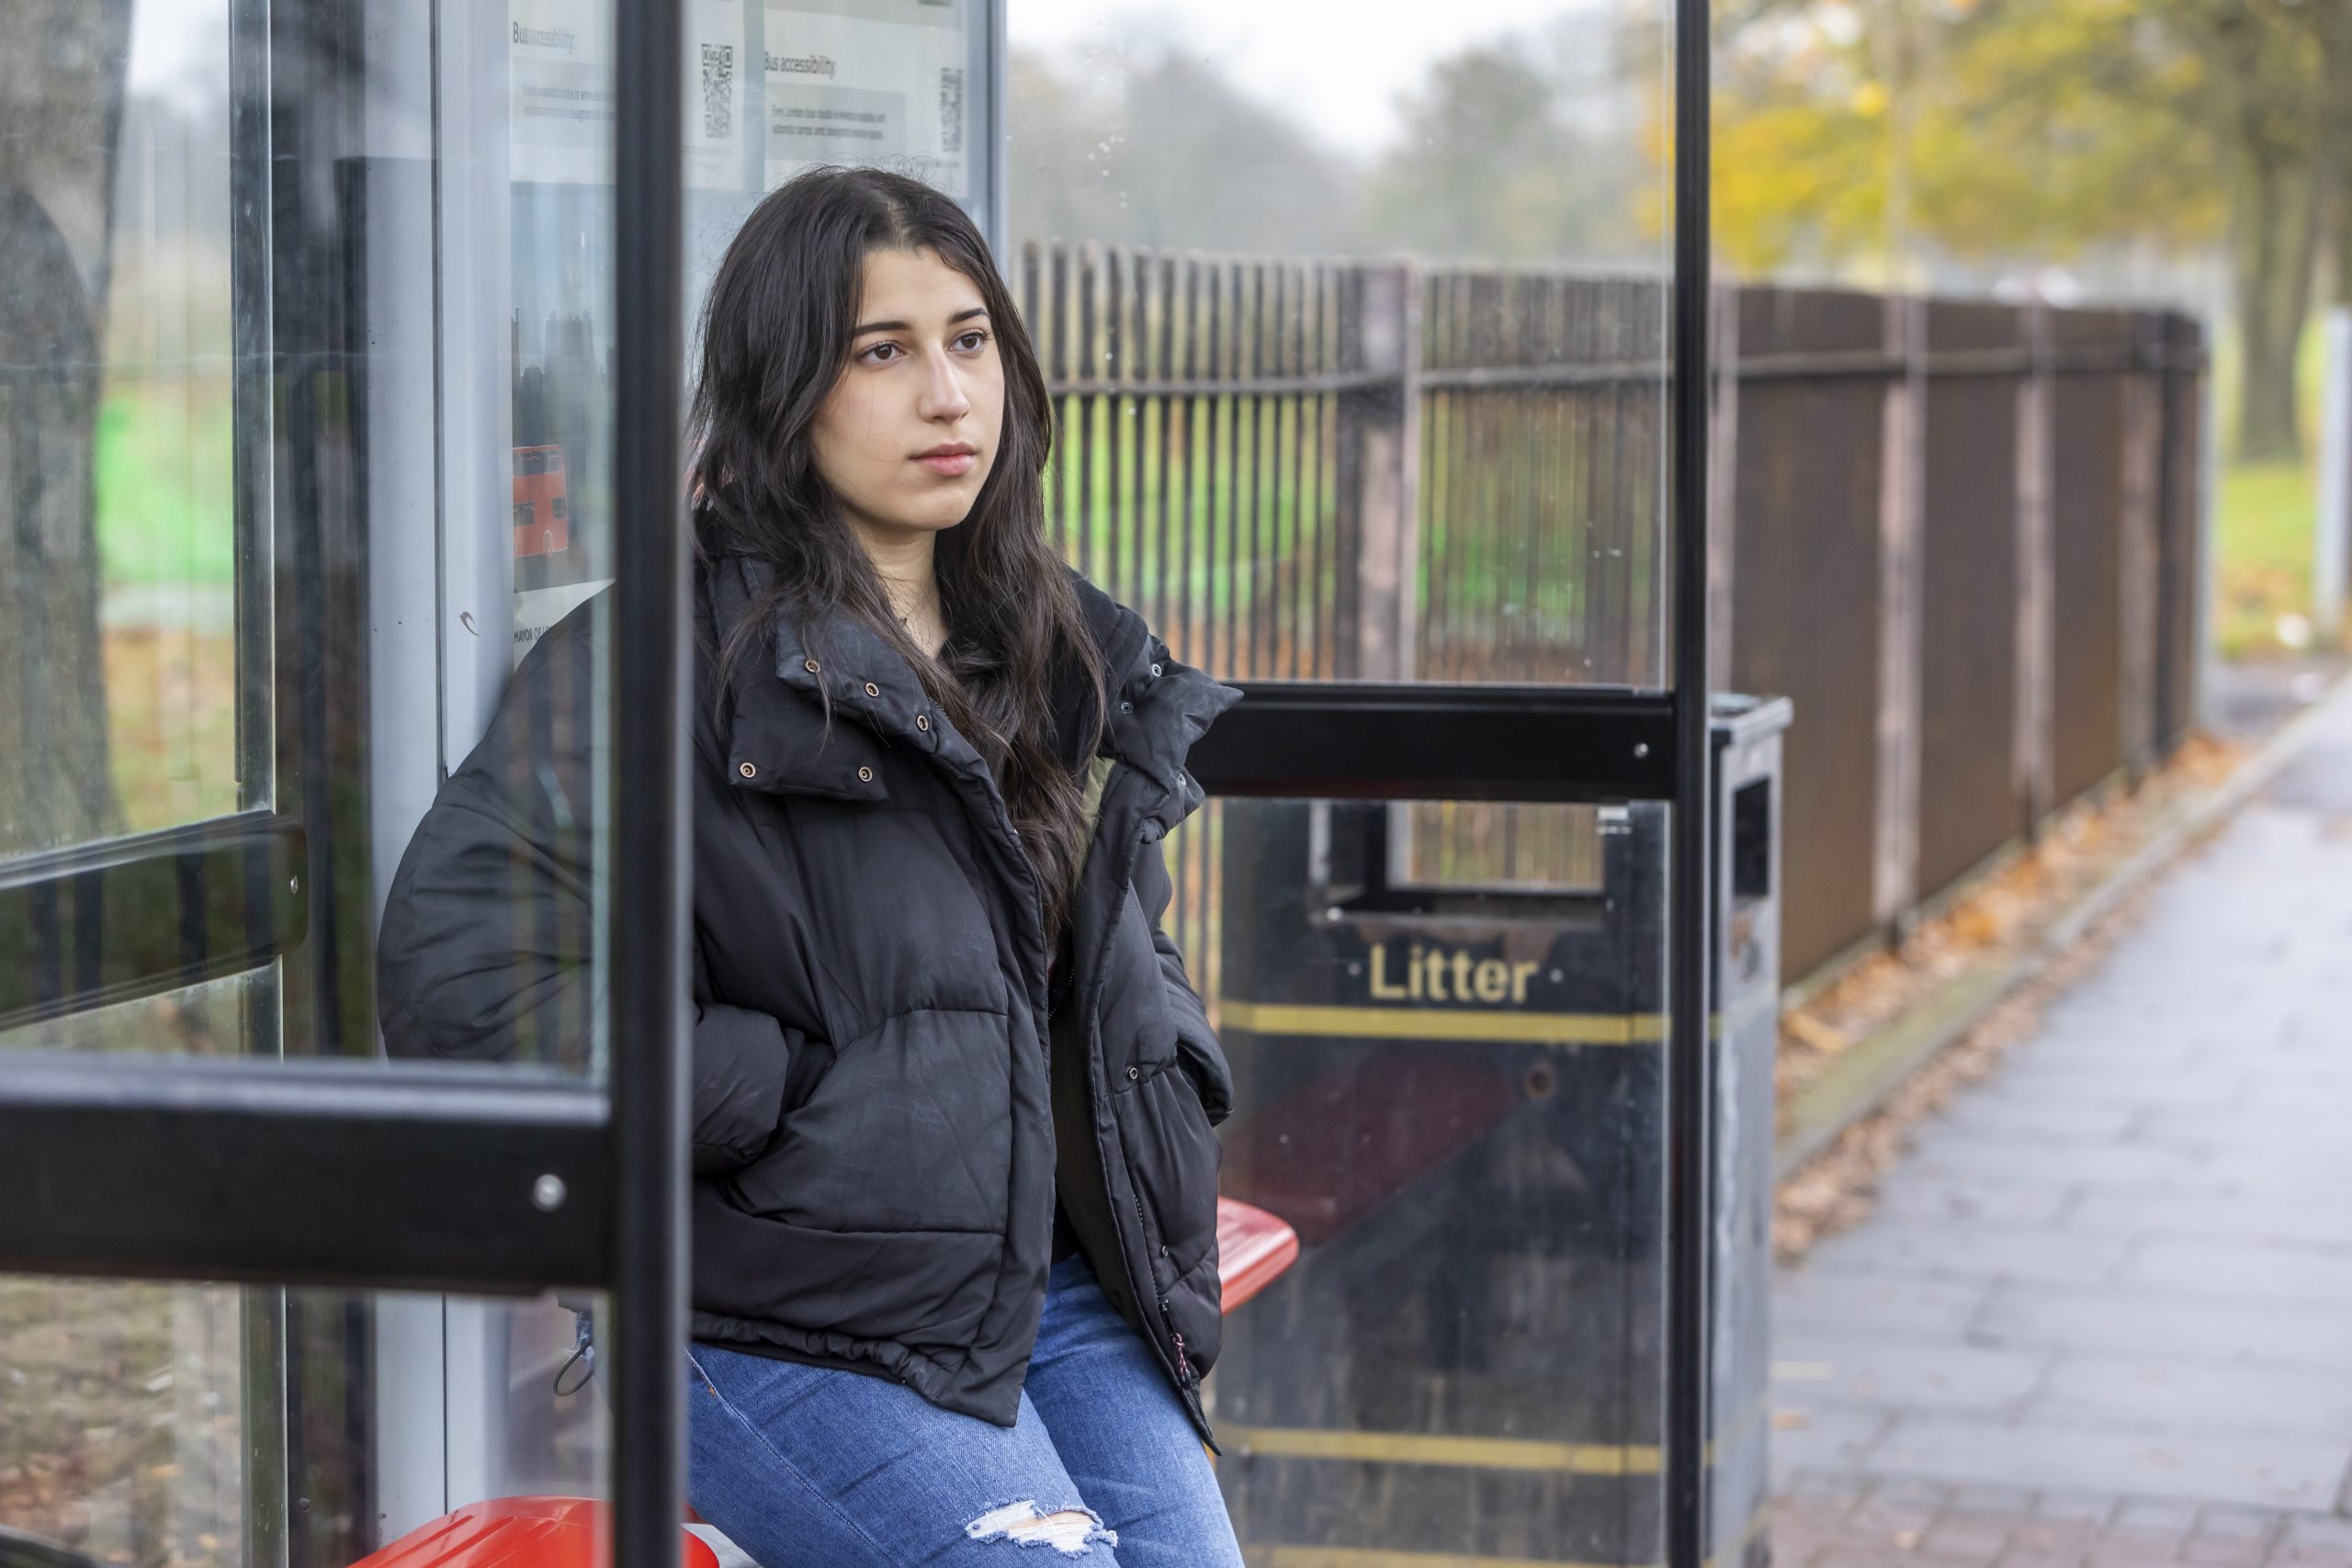 A young person is sitting at a bus stop wearing a black jacket, thinking about how to get support for sexual assault